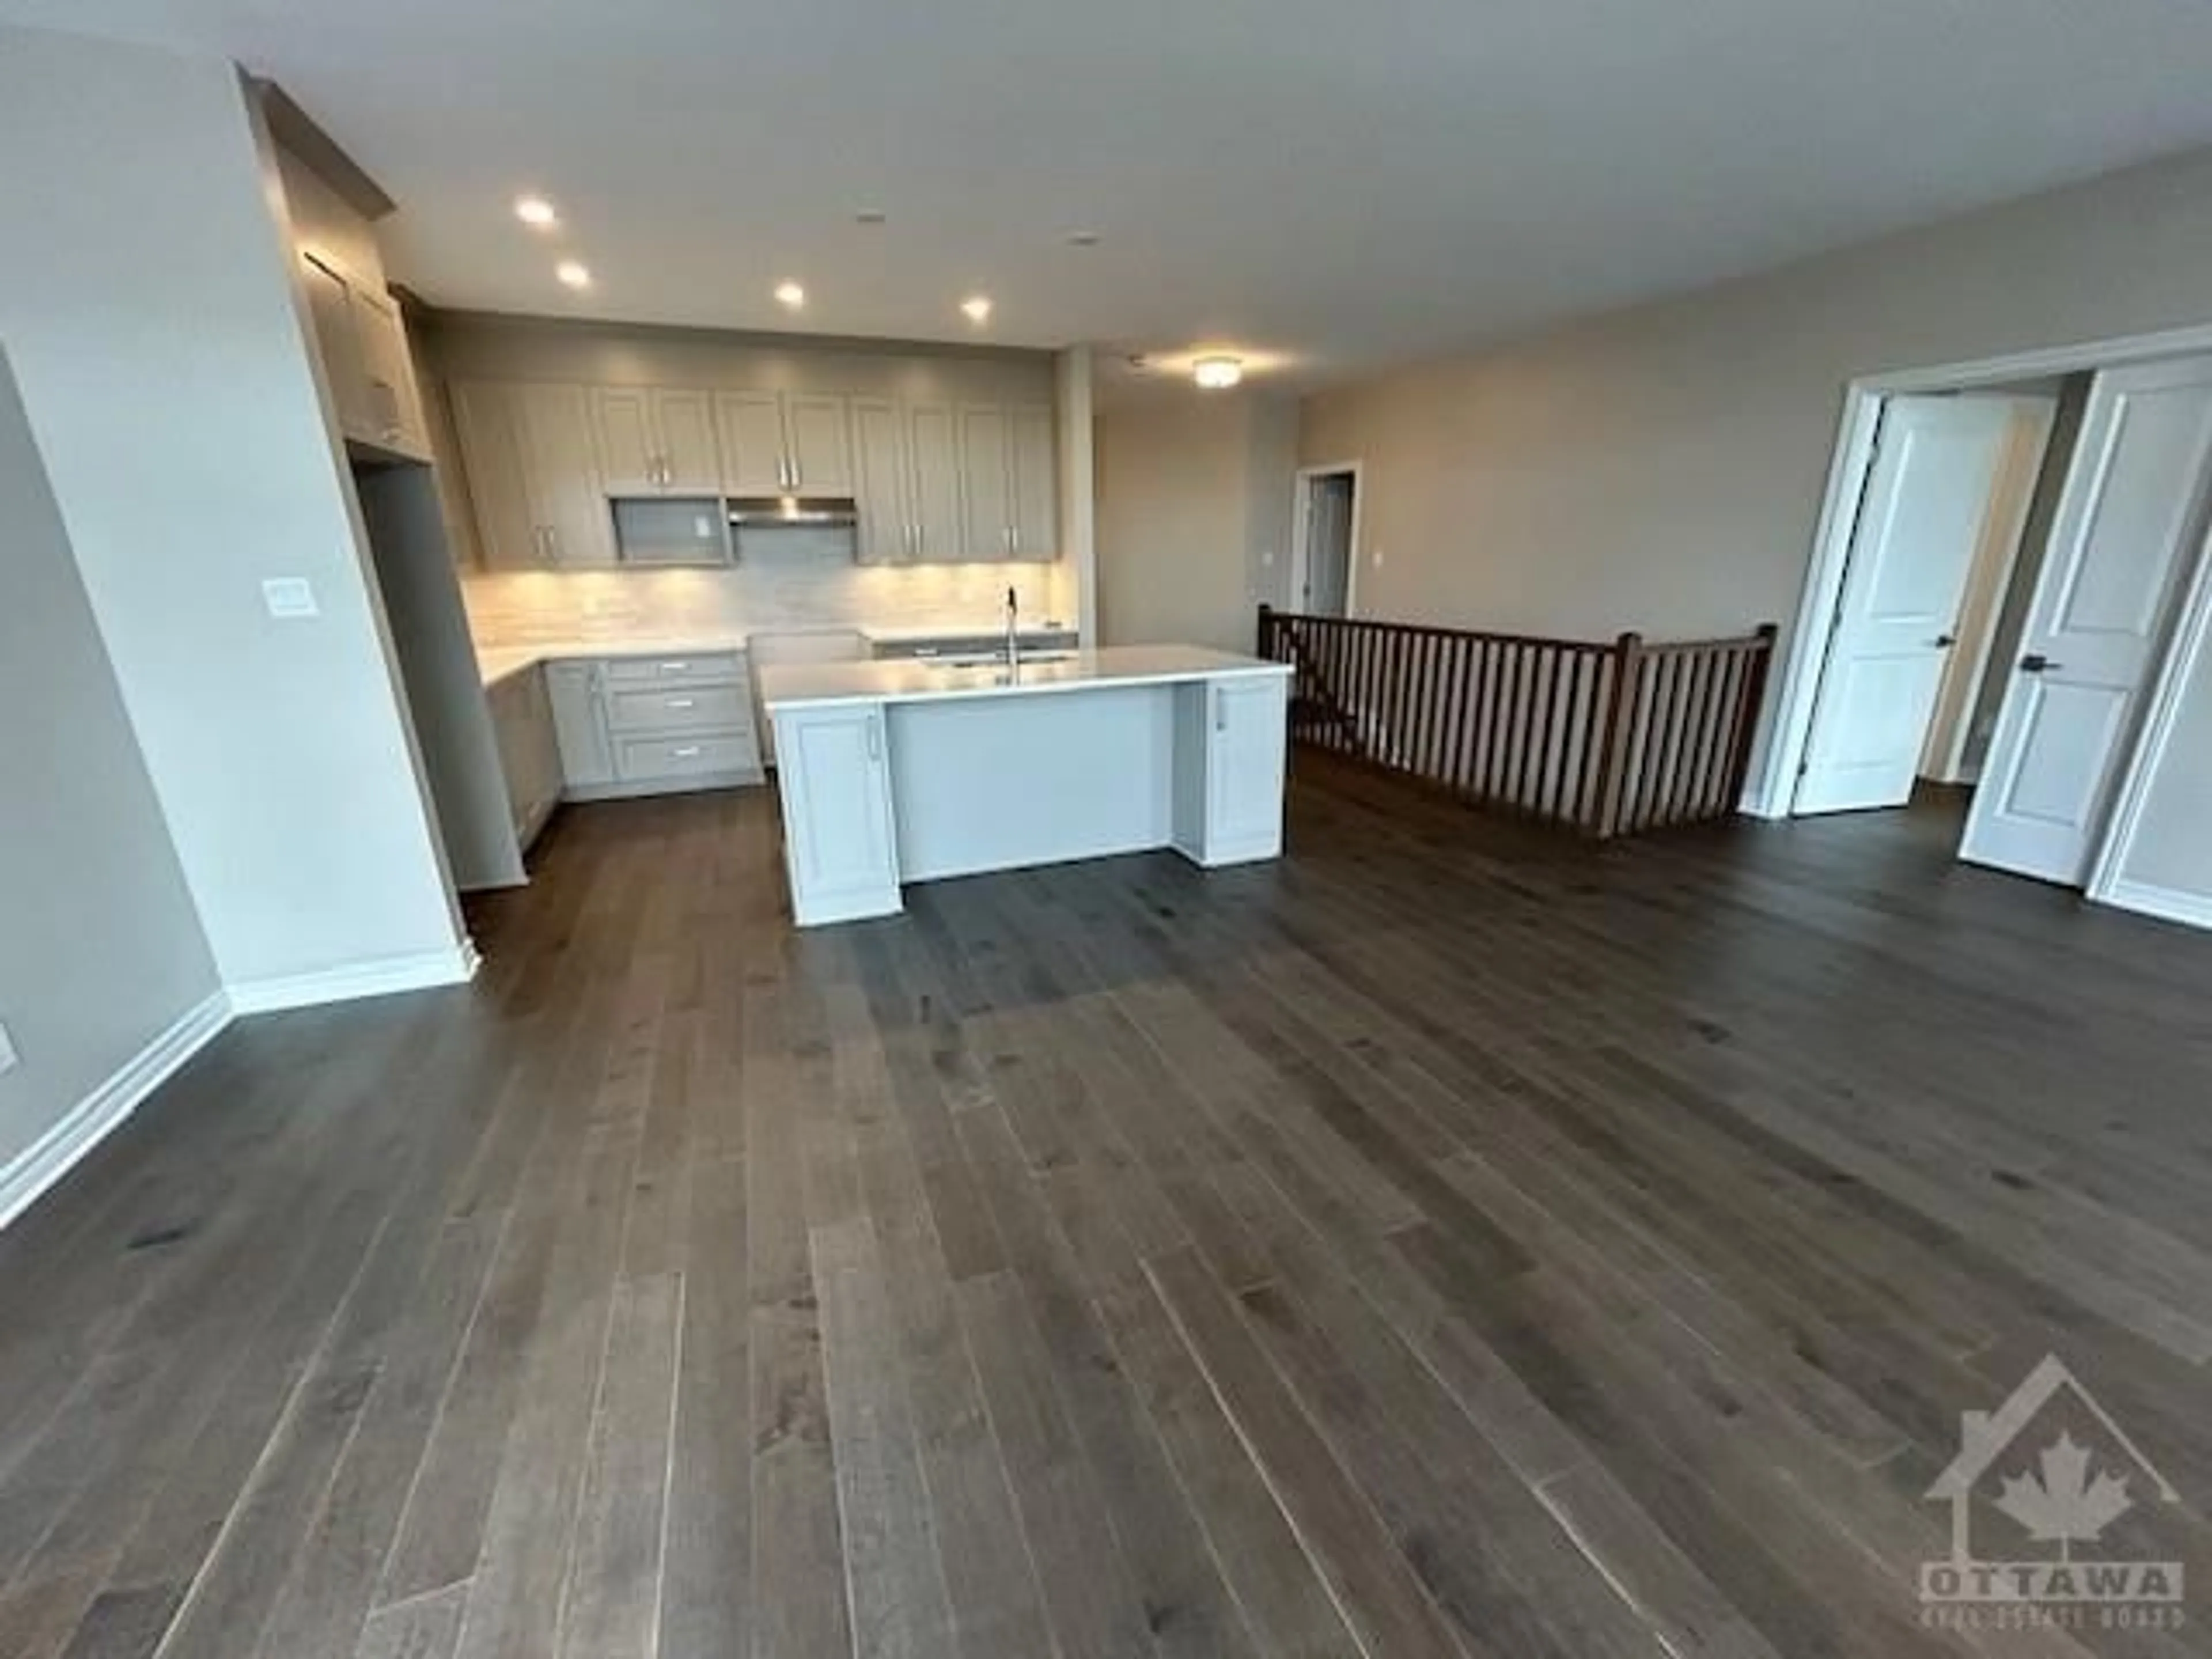 A pic of a room for 755 KEINOUCHE Pl, Ottawa Ontario K4A 5K3